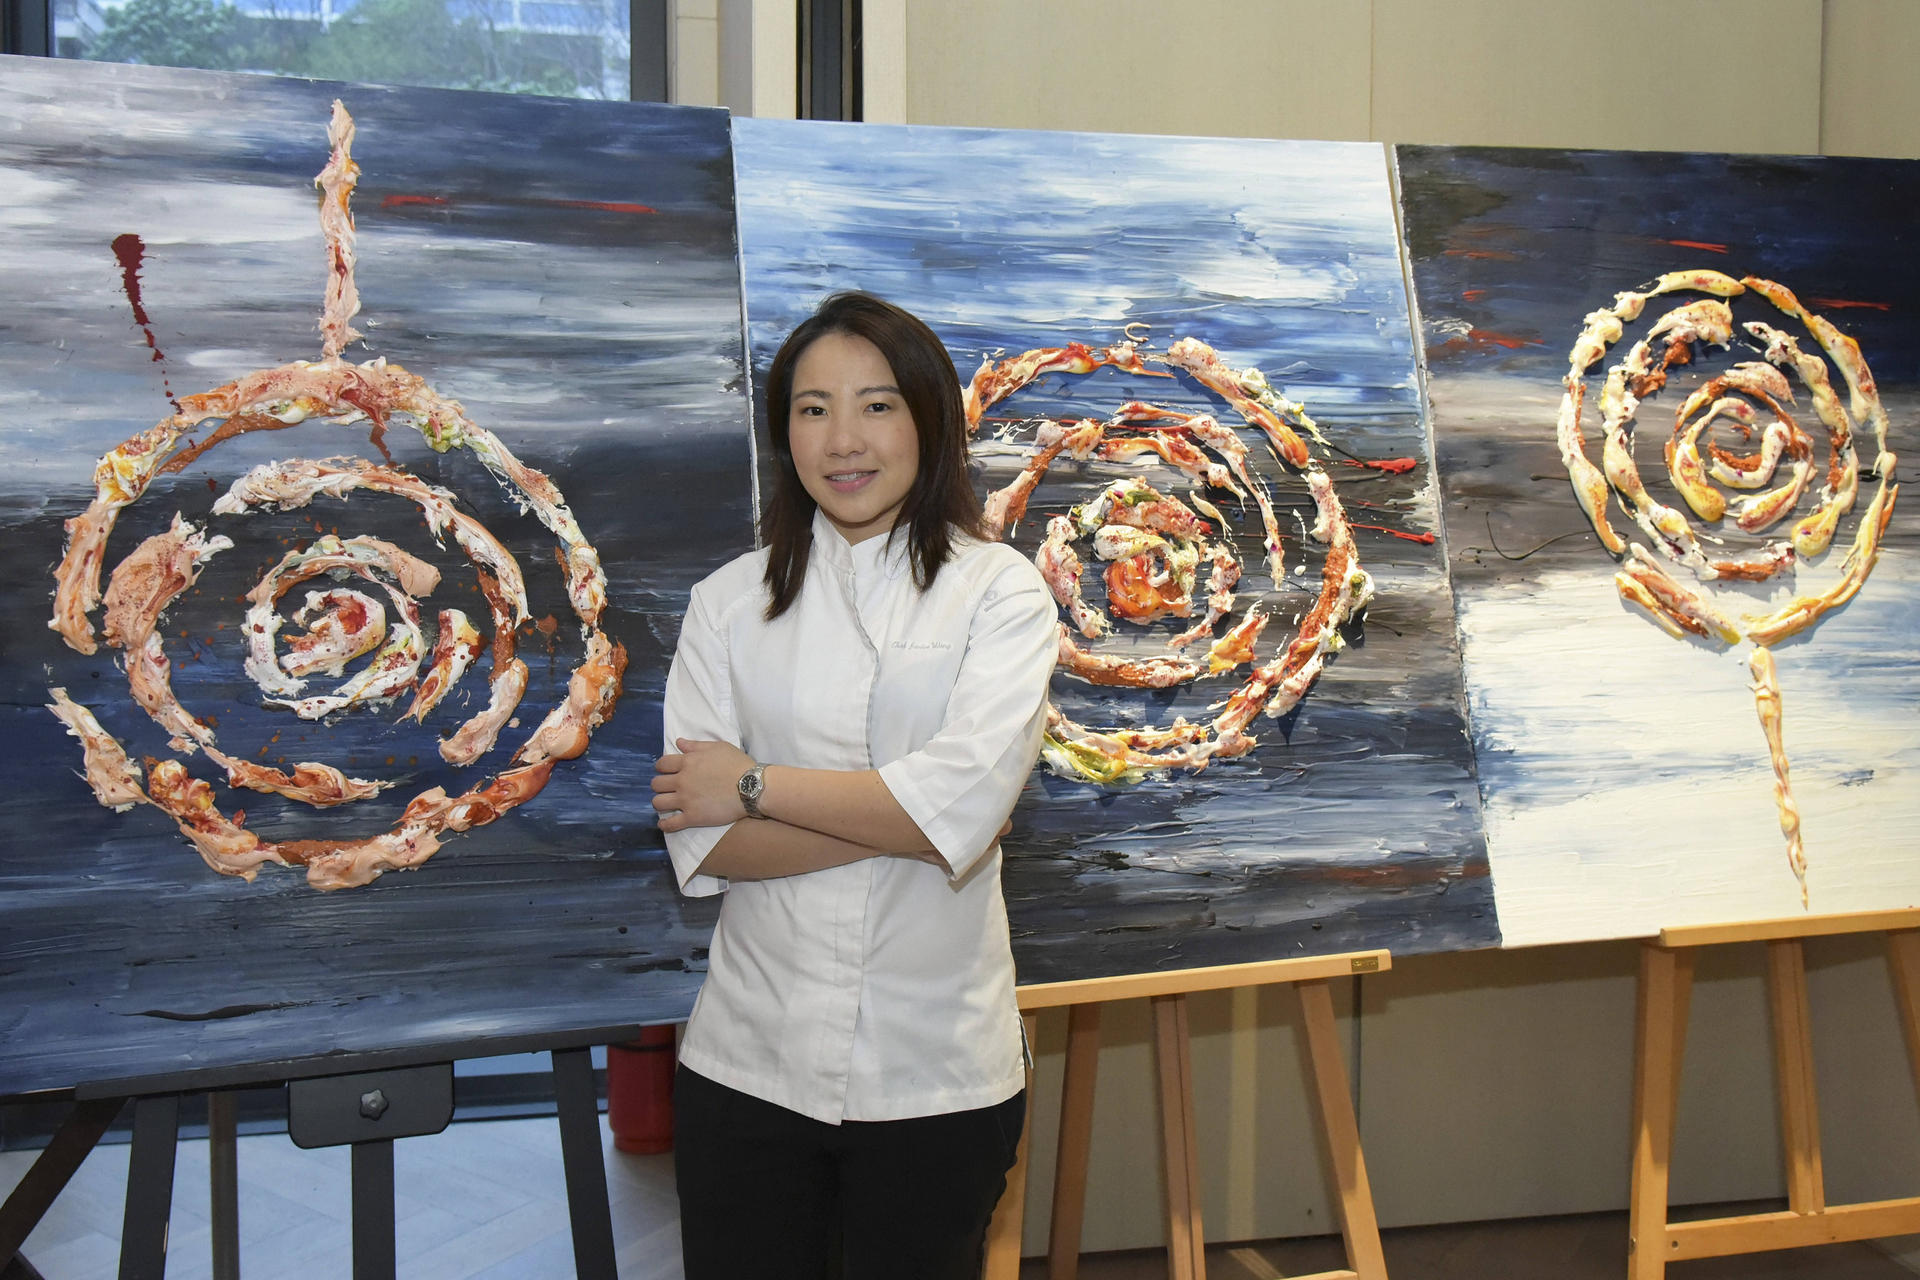 Janice Wong with one of her edible artworks, called Lollipop.